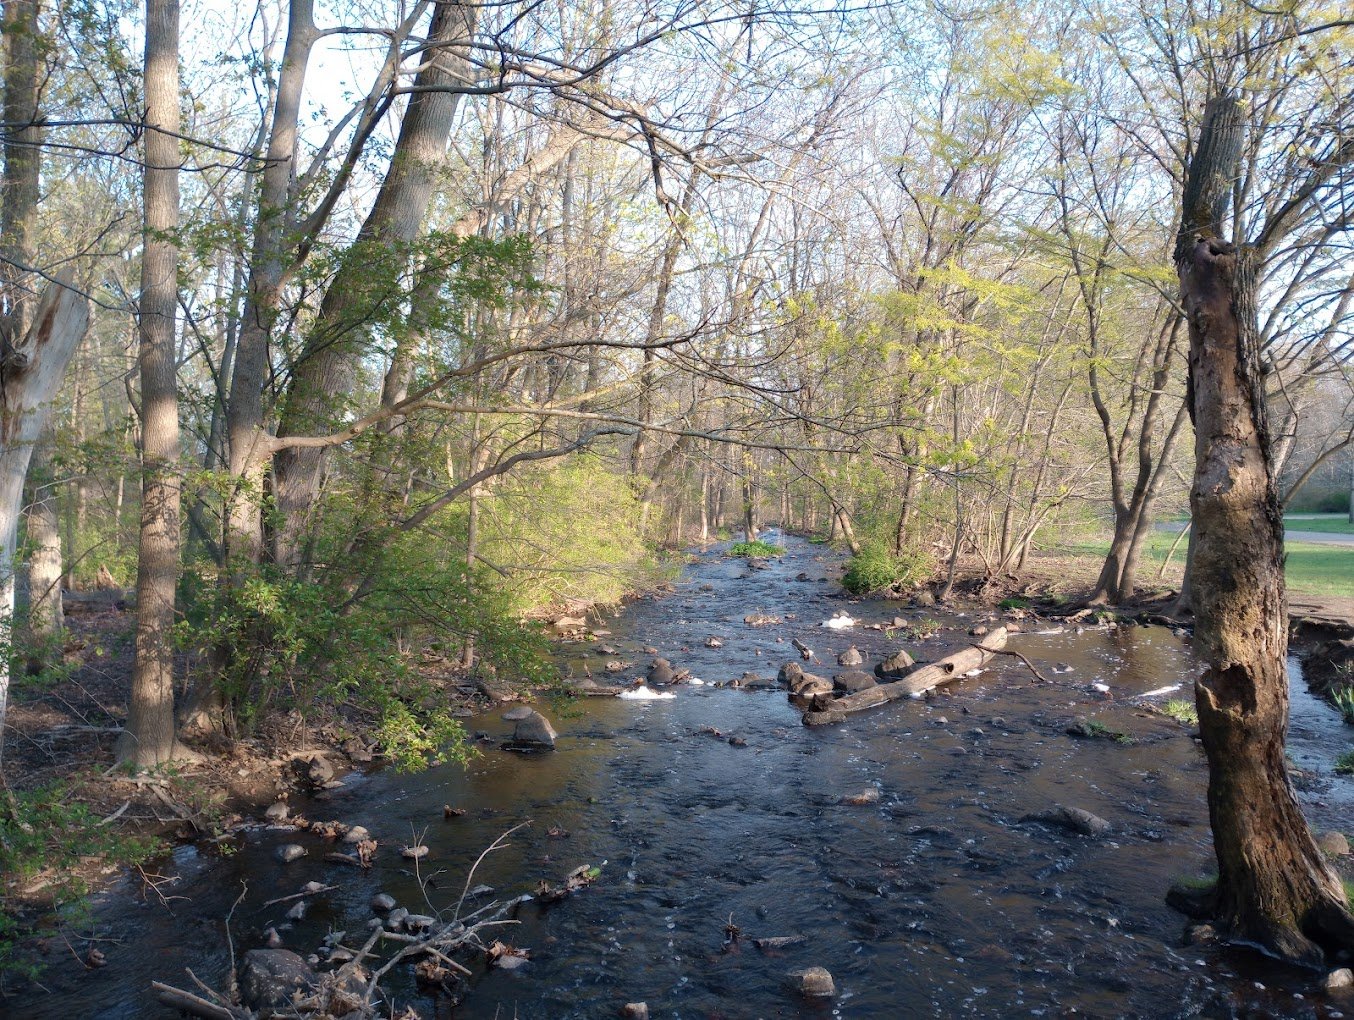 Beaver Brook in Waltham- a small brook meandering through a wooded area.